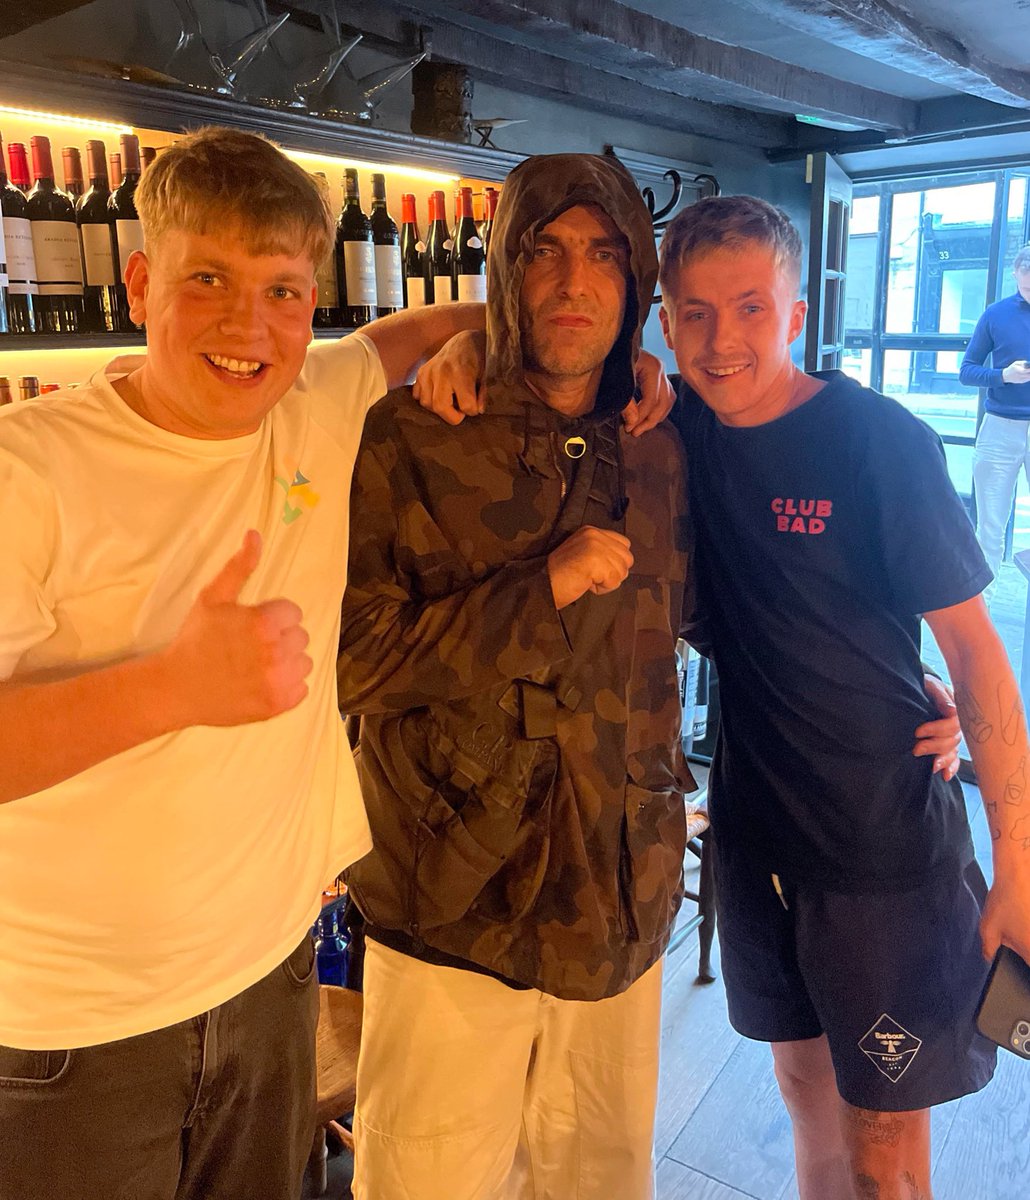 Liam Gallagher with fans two days ago. Man of the people 👏🏻 📷 Sam Raines